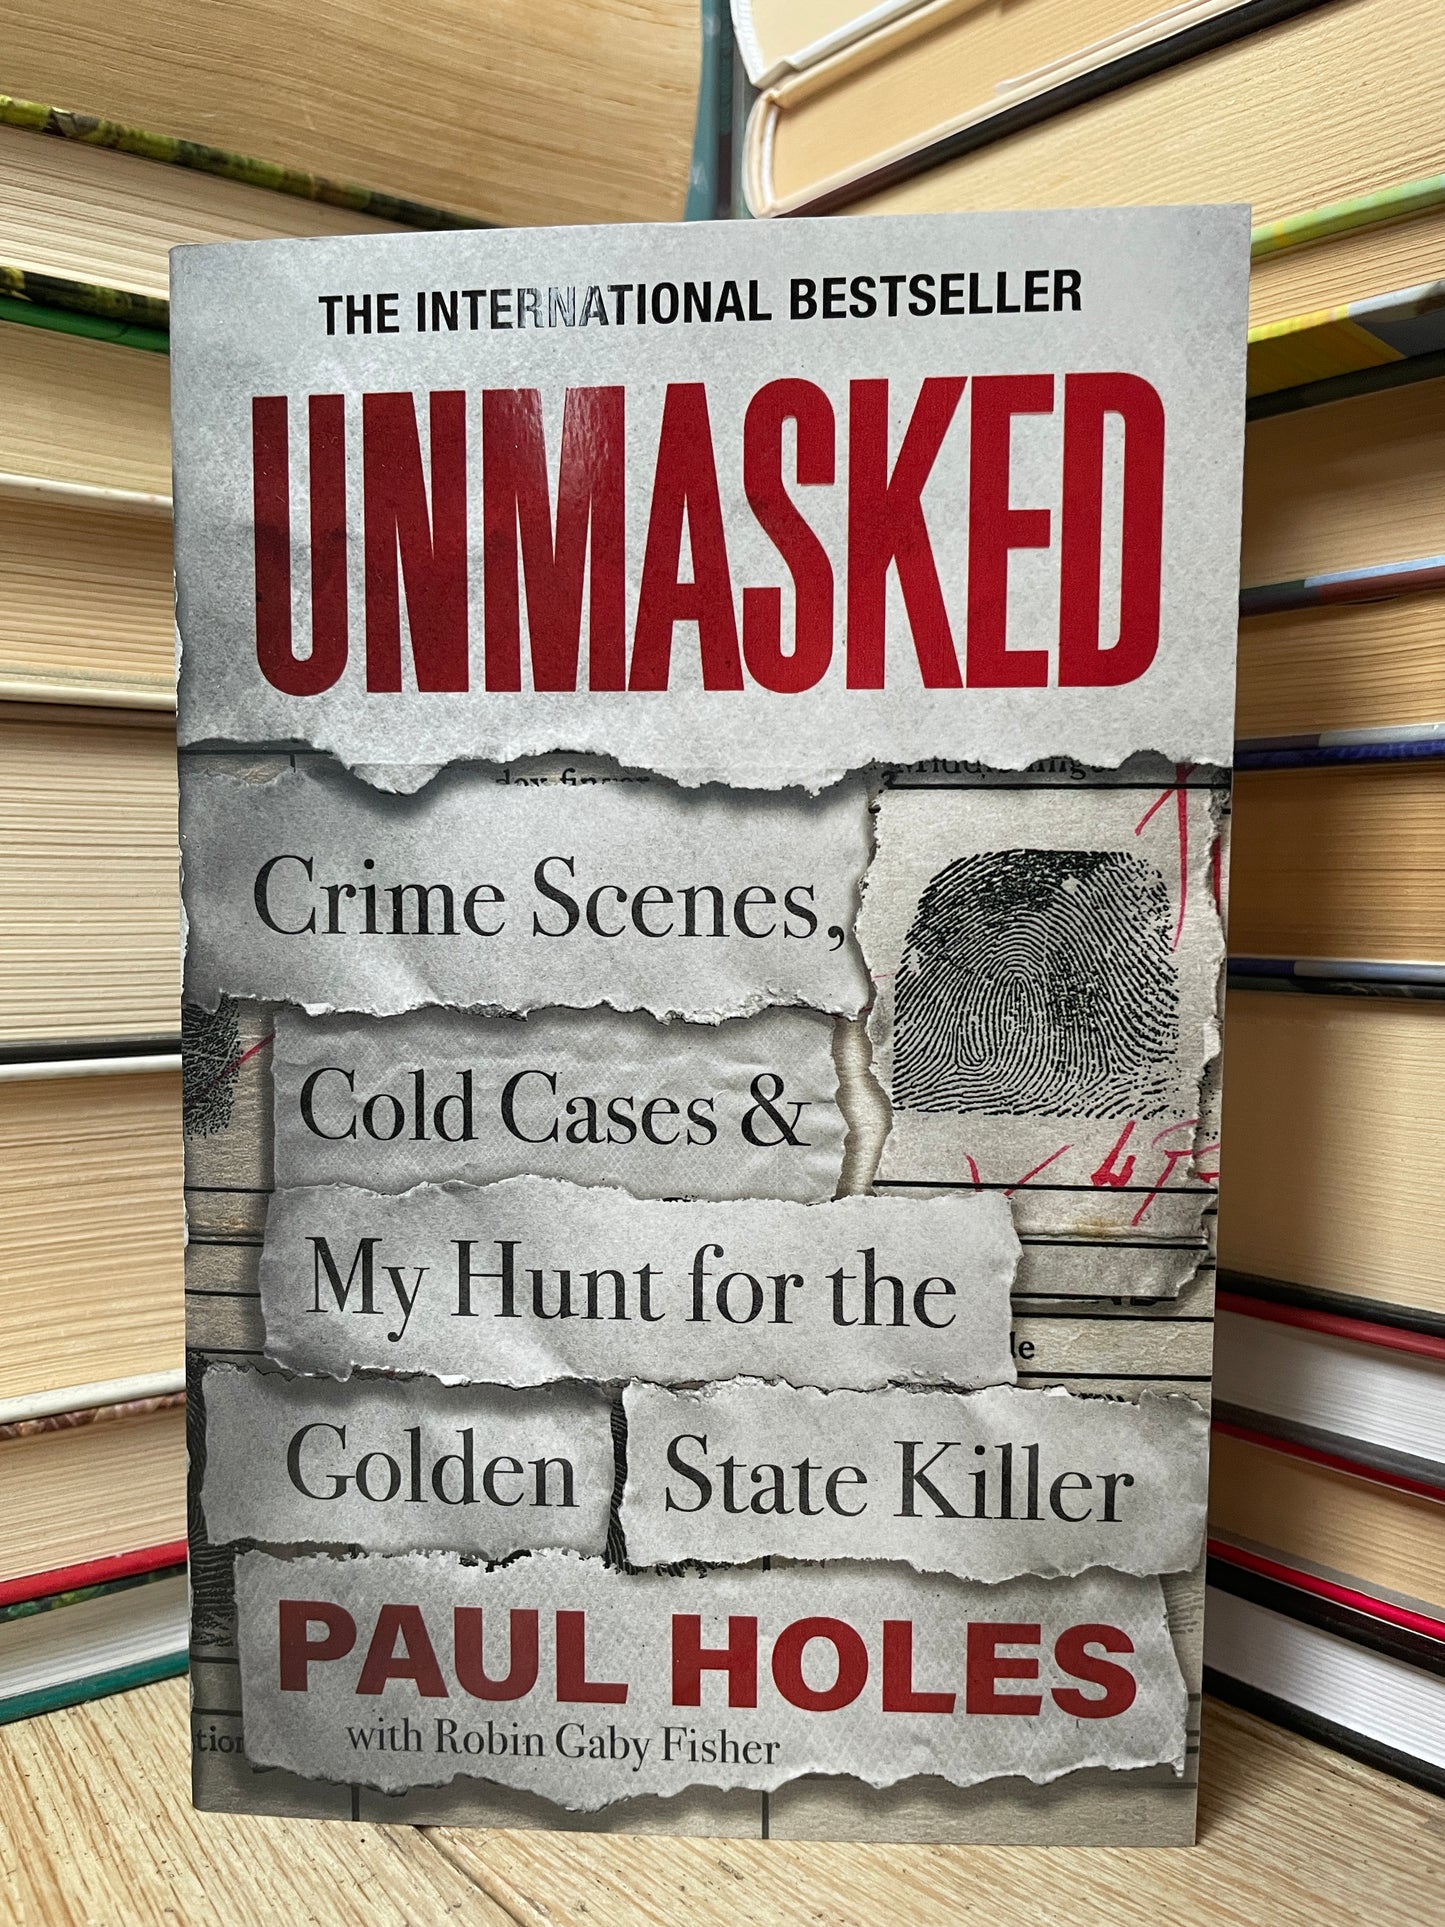 Paul Holes - Unmasked: Crime Scenes, Cold Cases and My Hunt for the Golden State Killer (NAUJA)